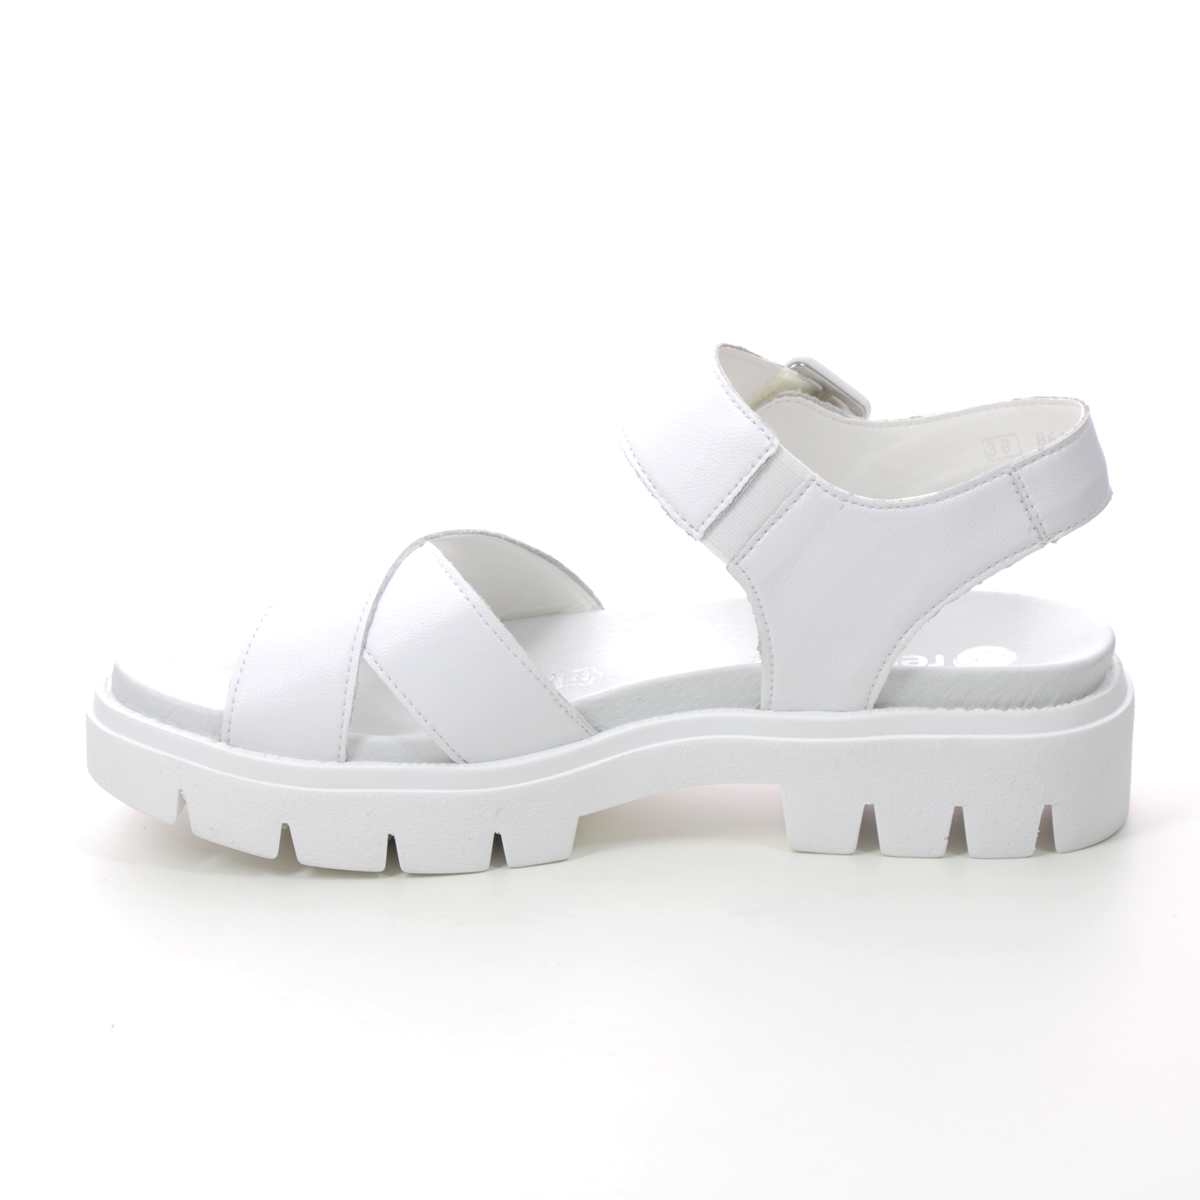 Remonte Odeon D7950-80 WHITE LEATHER Flat Sandals